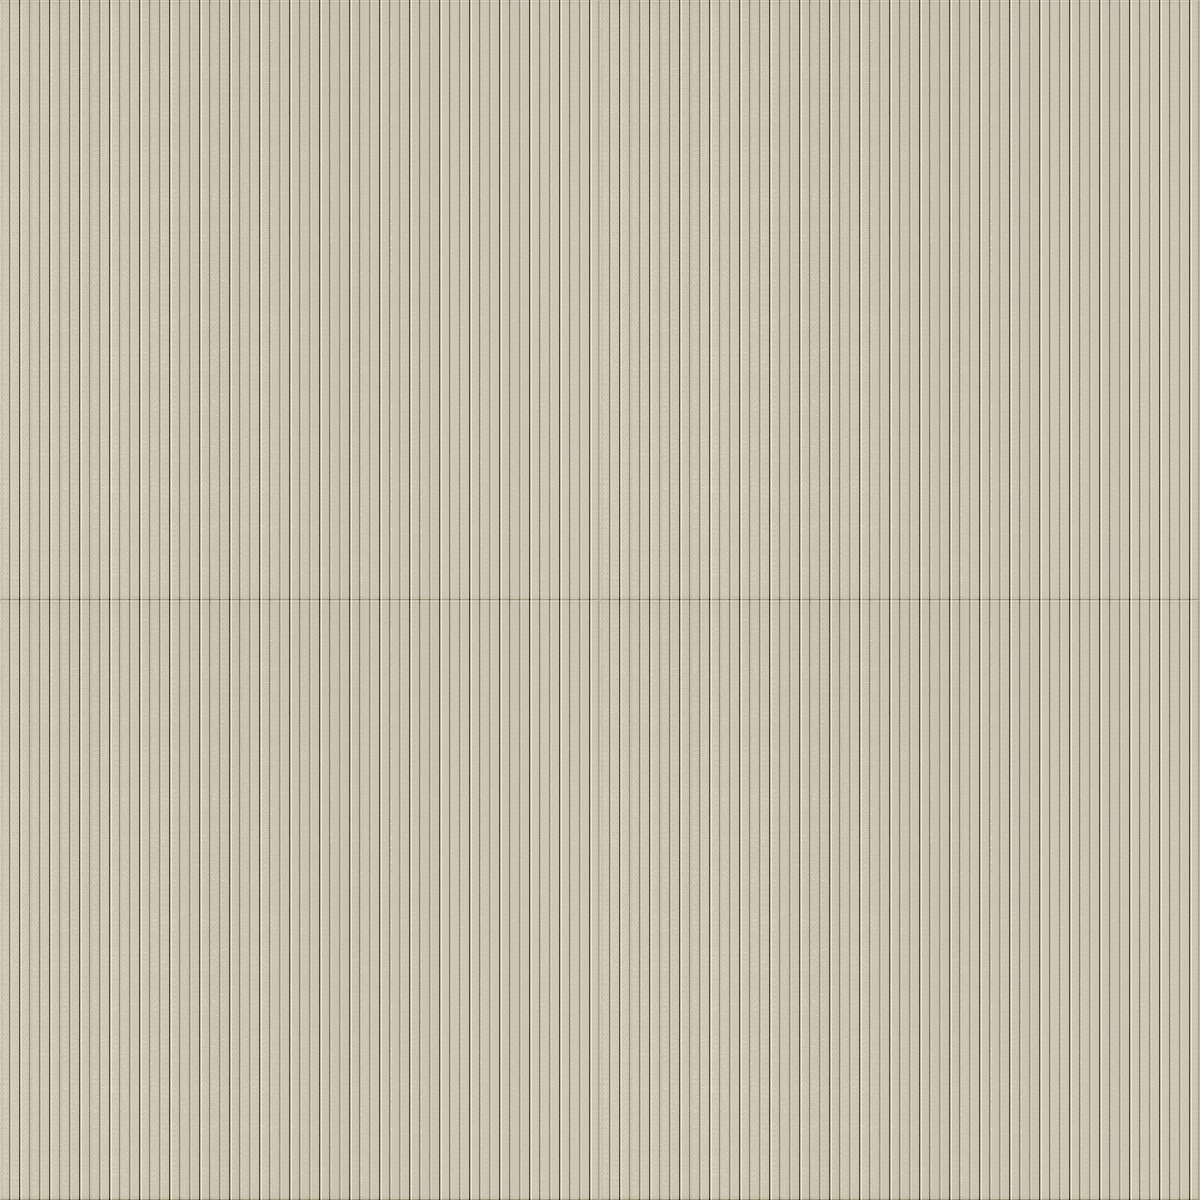 A seamless surfacing texture with h01l natural units arranged in a Stack pattern